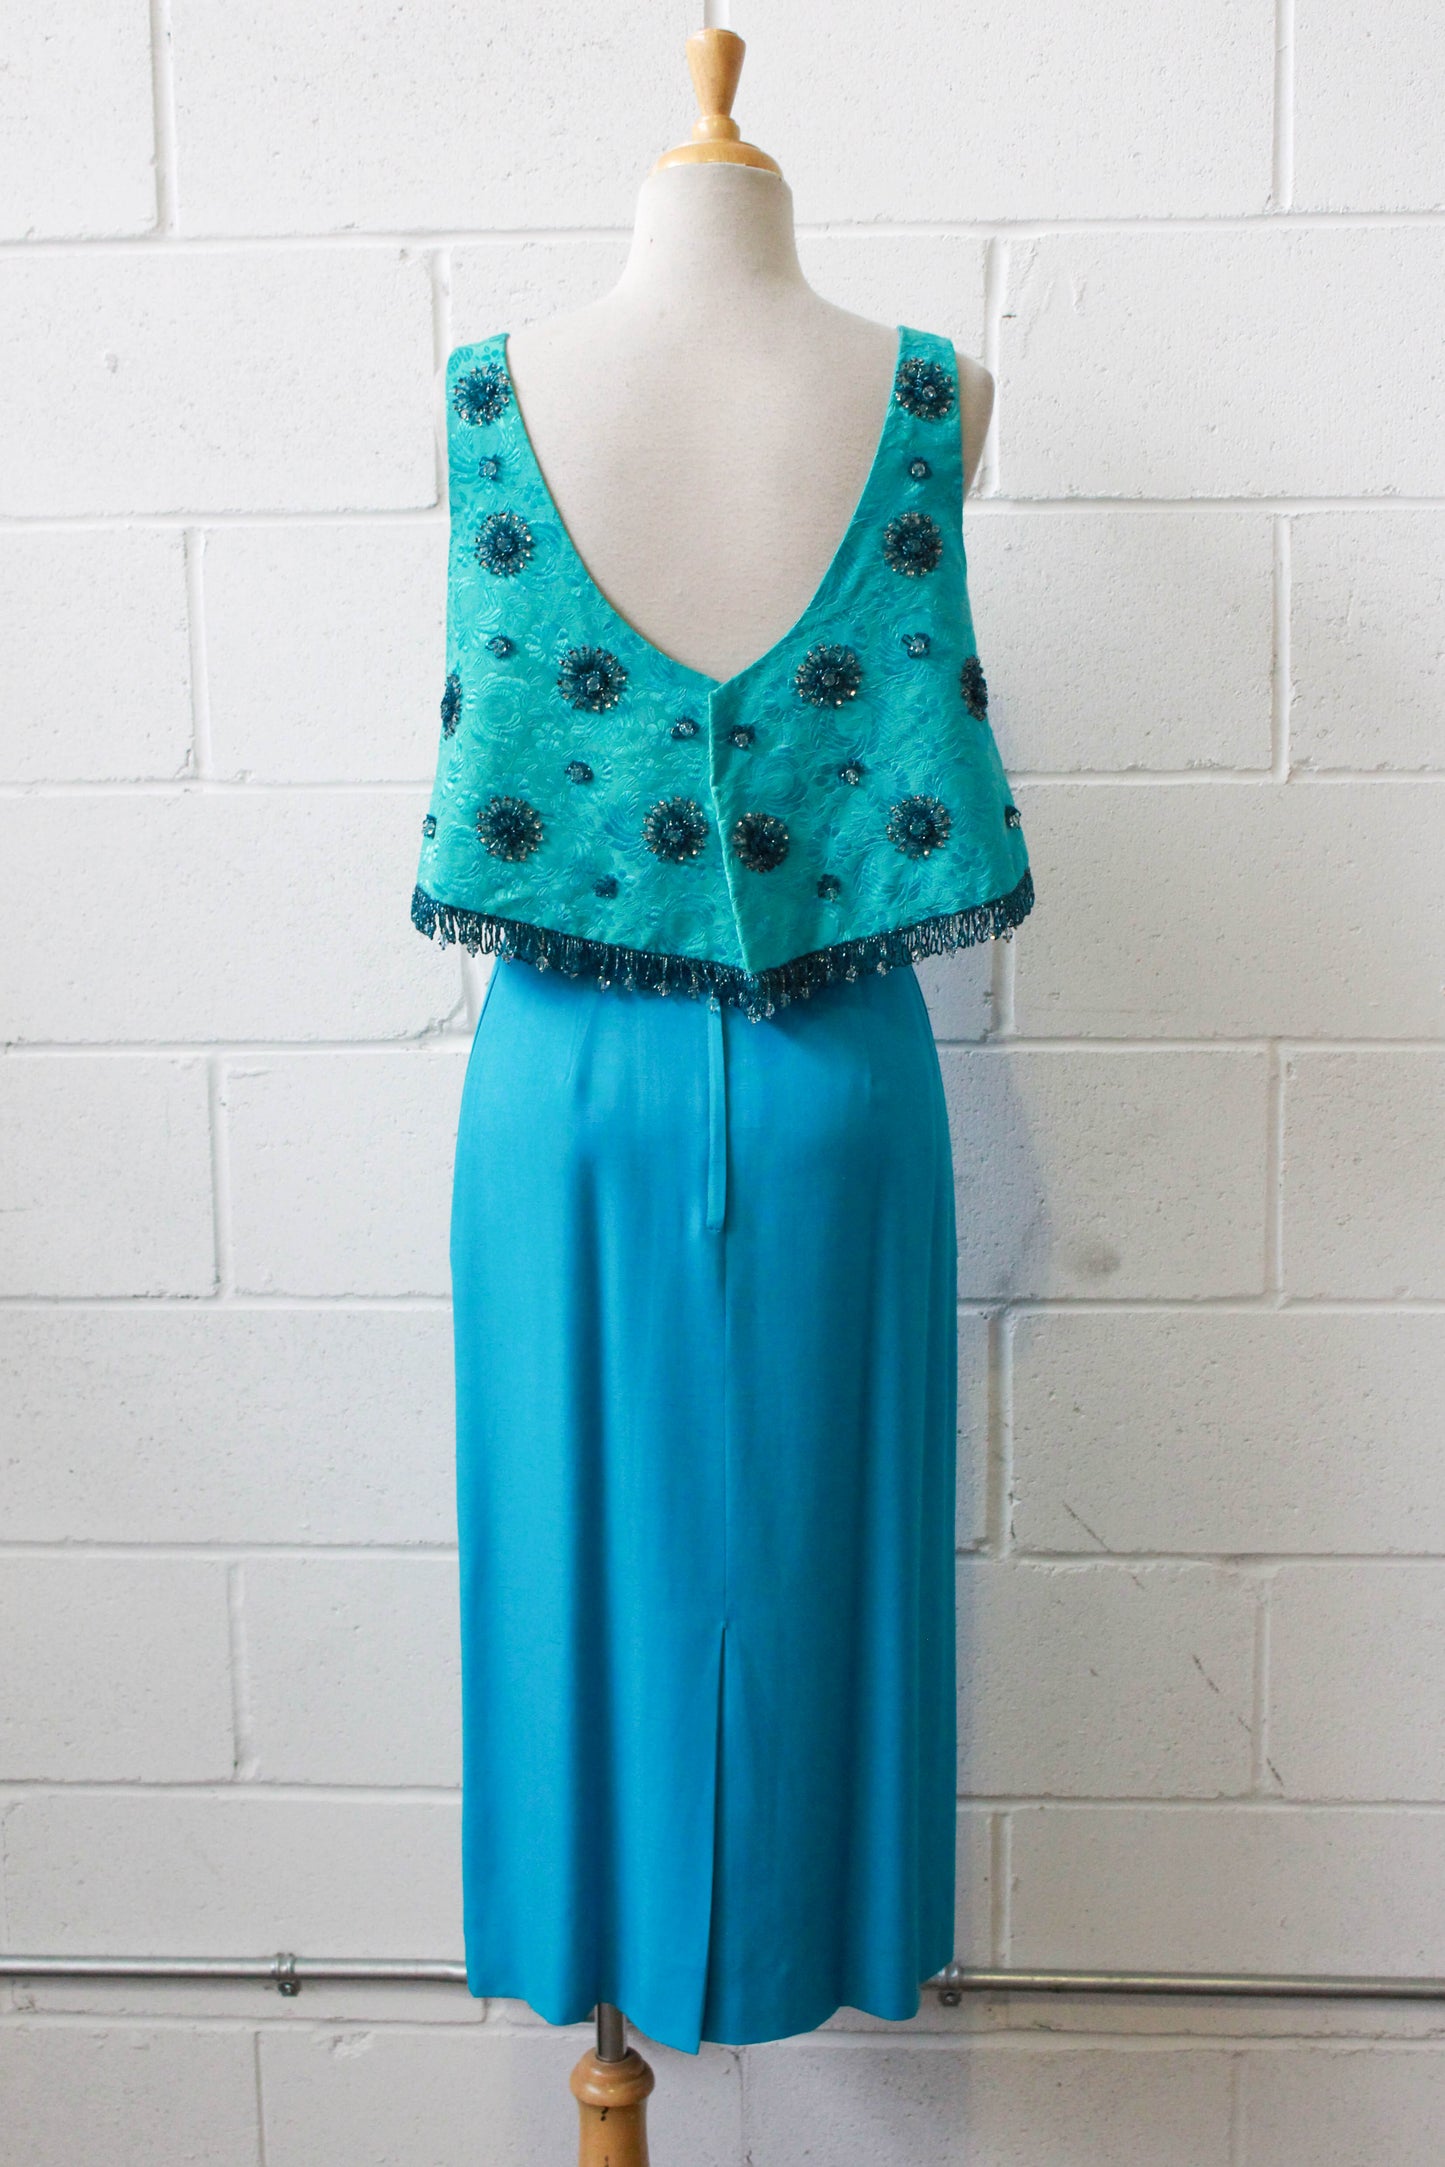 1980s Turquoise Pencil Skirt with Pleat Detail, Waist 26"